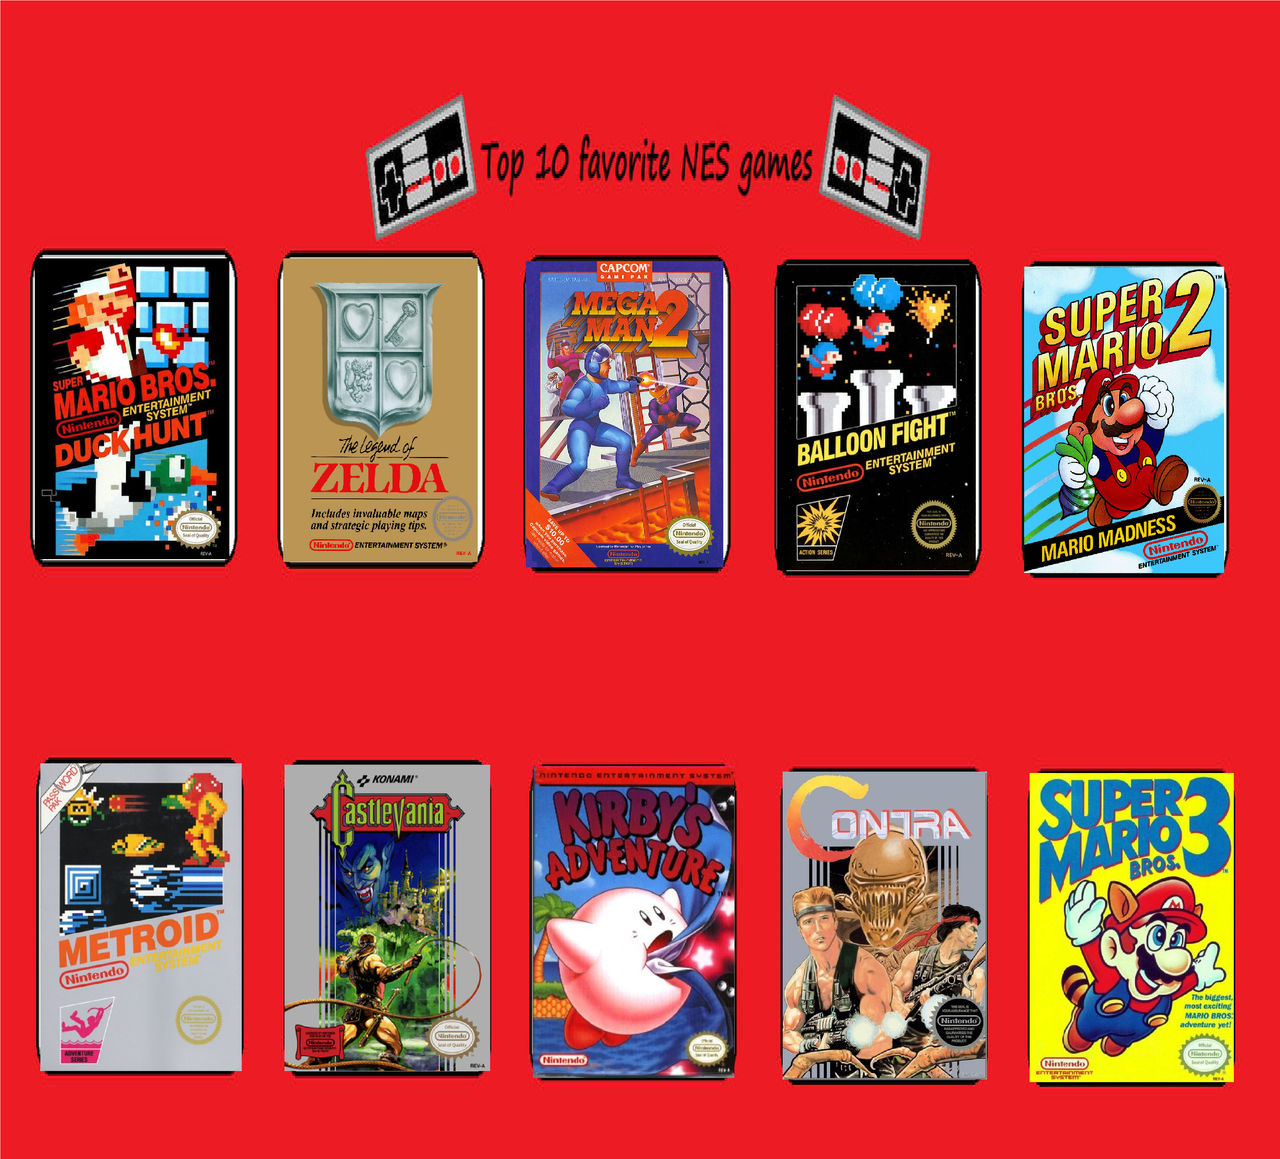 Top 10 NES Games by Perro2017 on